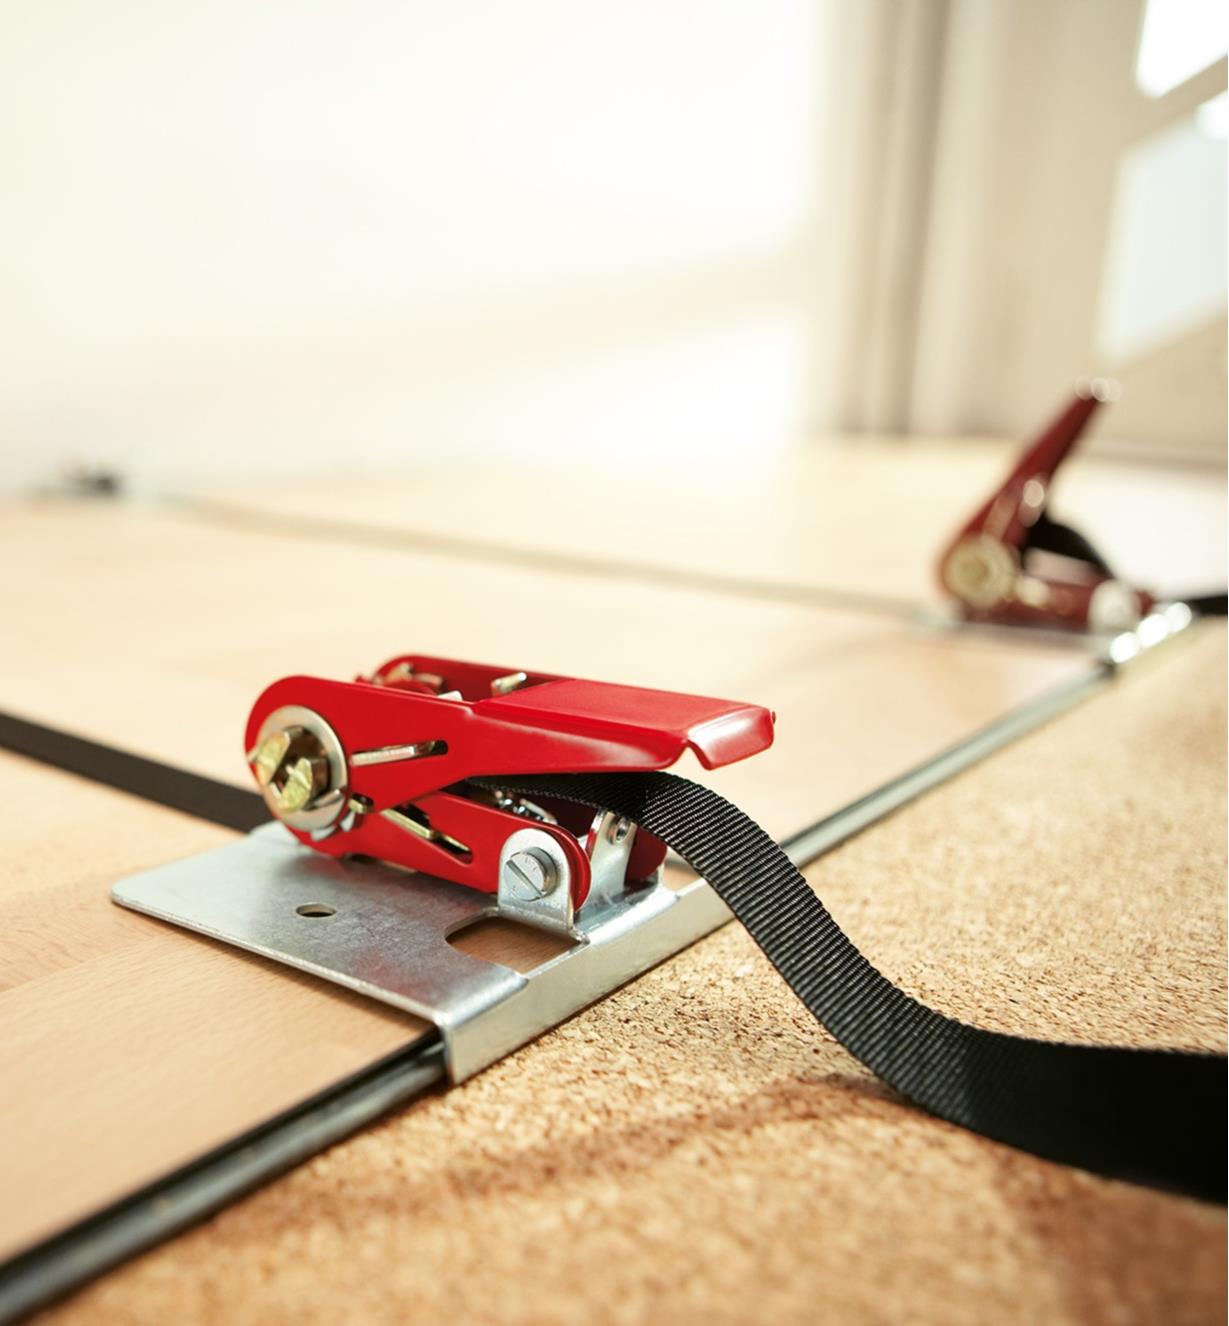 A Bessey flooring clamp strap being used to hold rows of flooring in position during installation